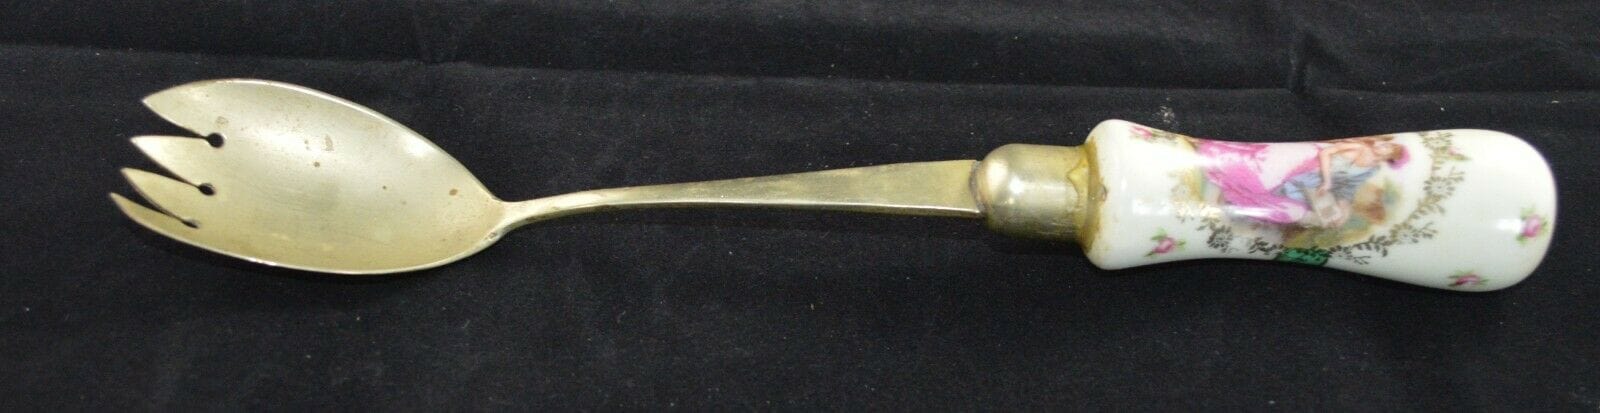 TABLEWARE E.P.N.S. SERVING FORK WITH PICTURE HANDLE ( PREVIOUSLY OWNED)FAIRLY GOOD CONDITION - TMD167207